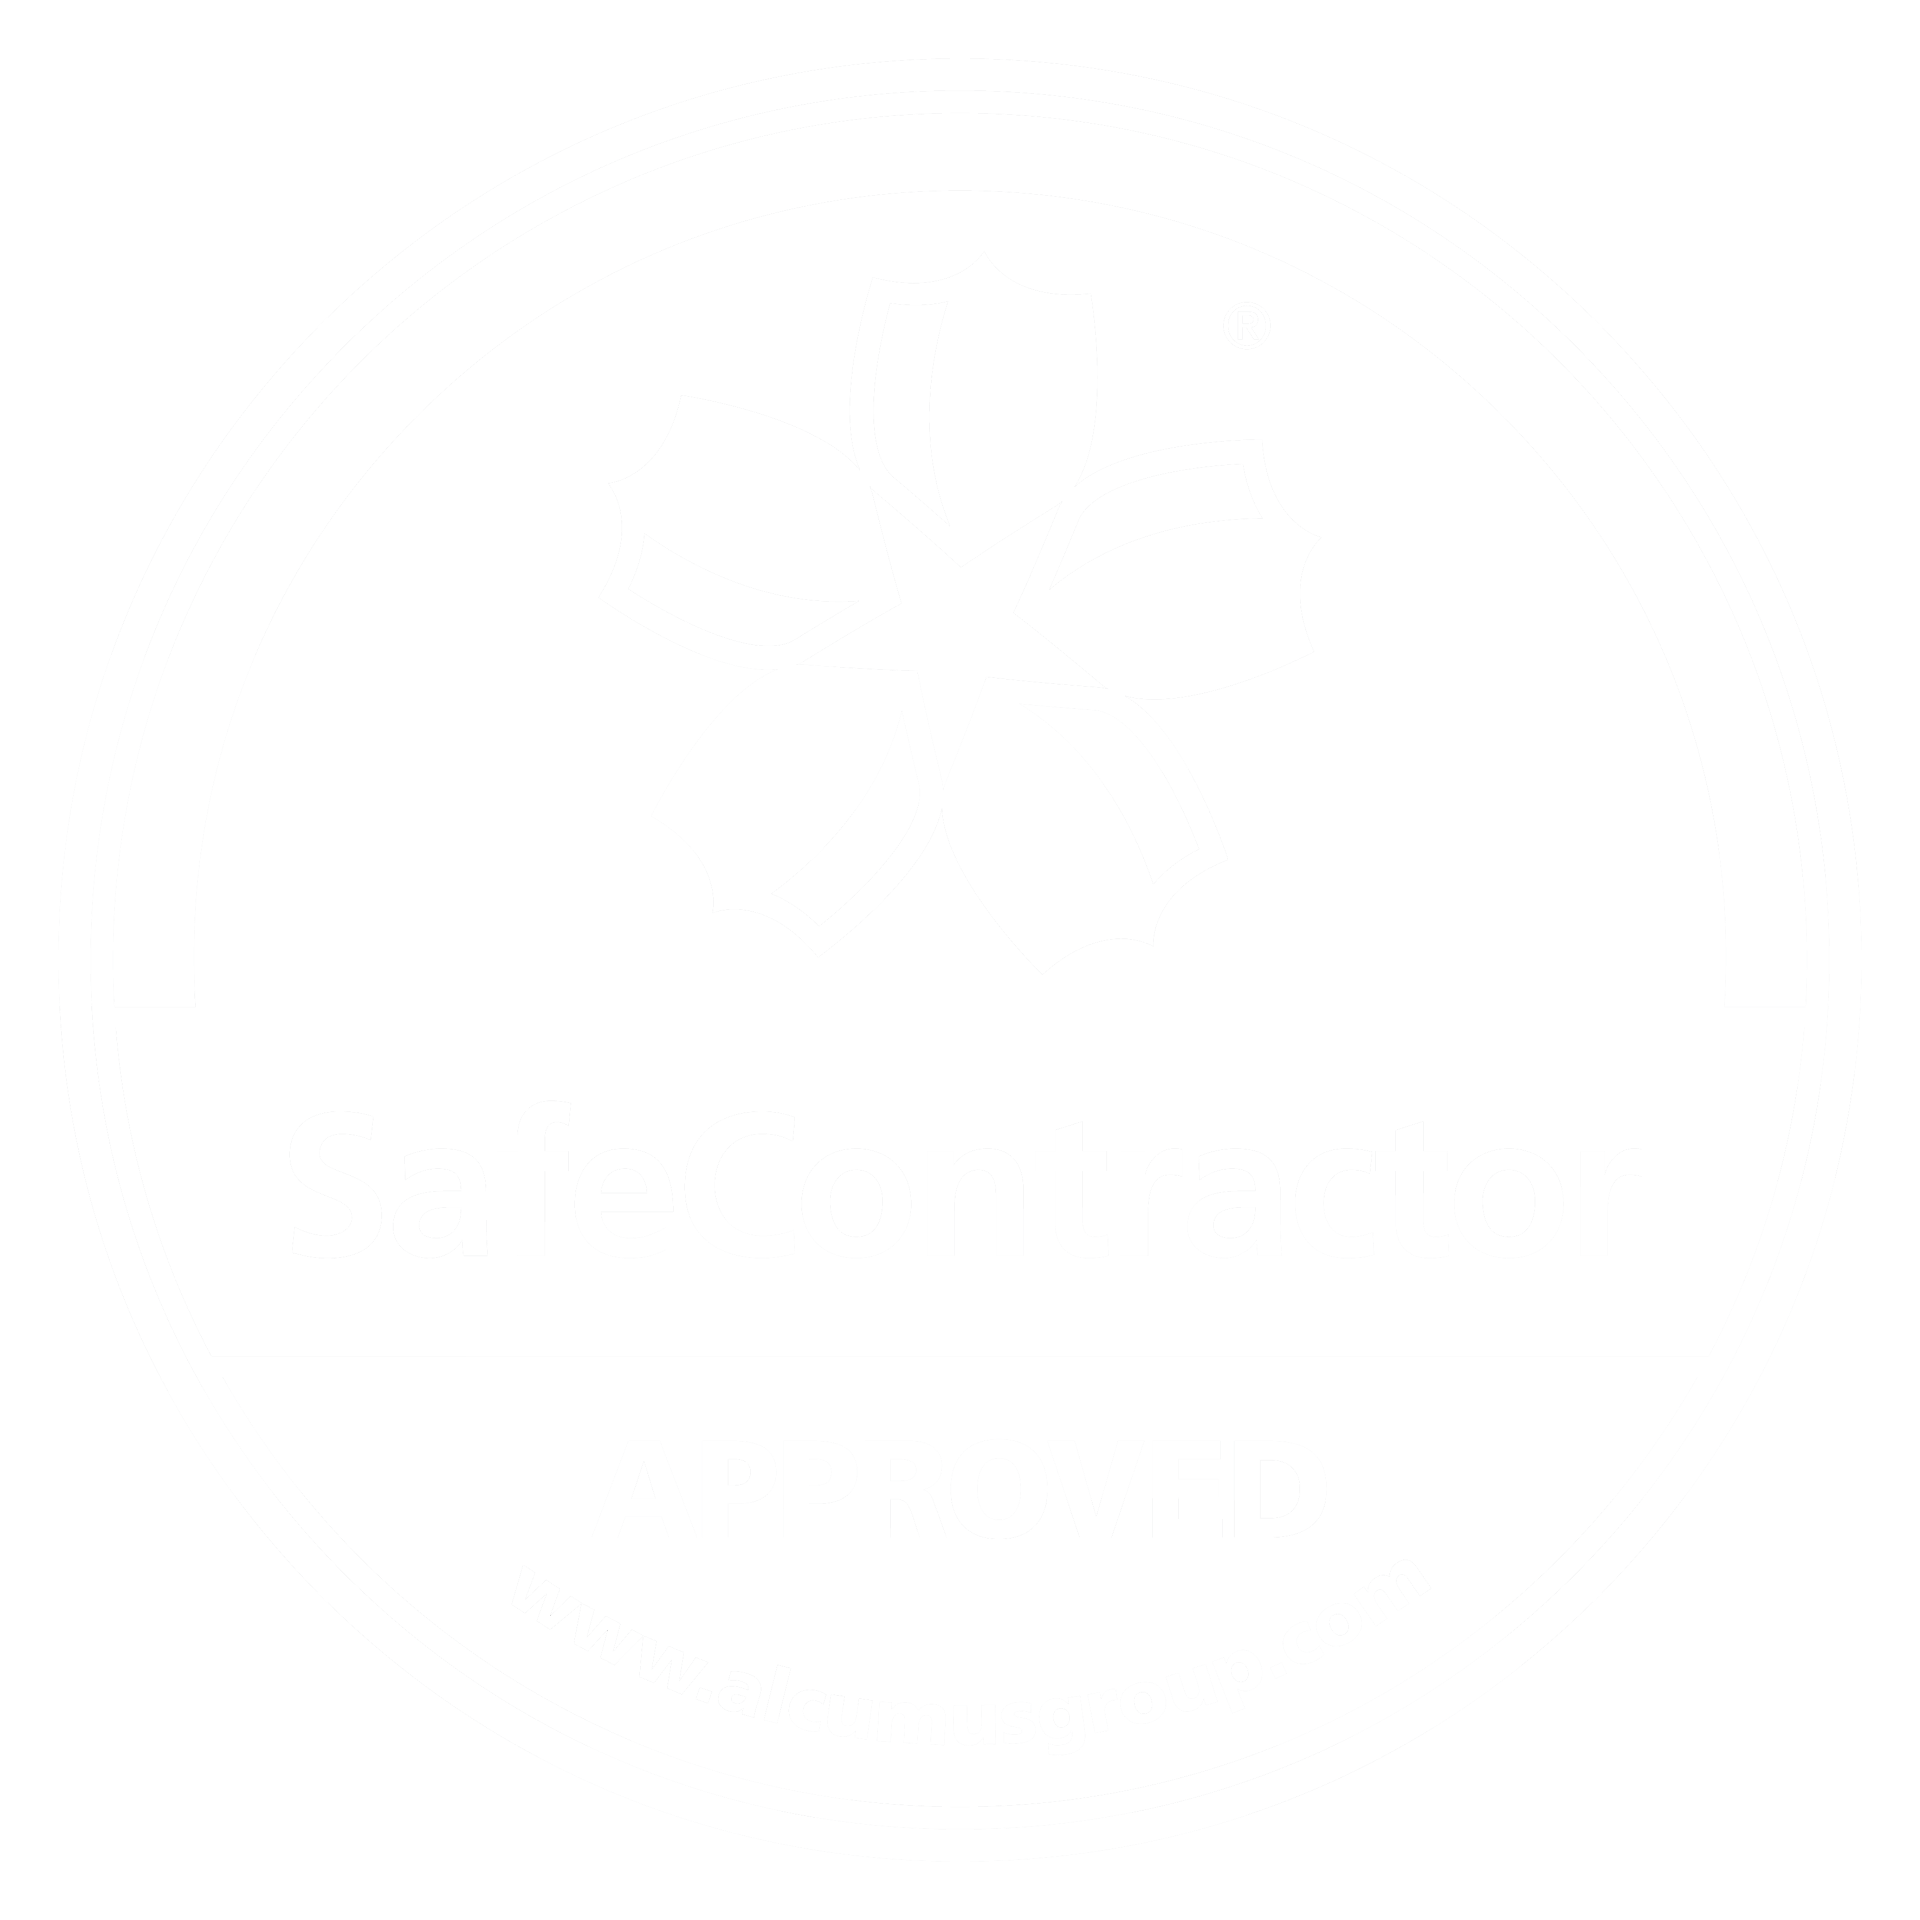 Safe Contractor Approved logo 1